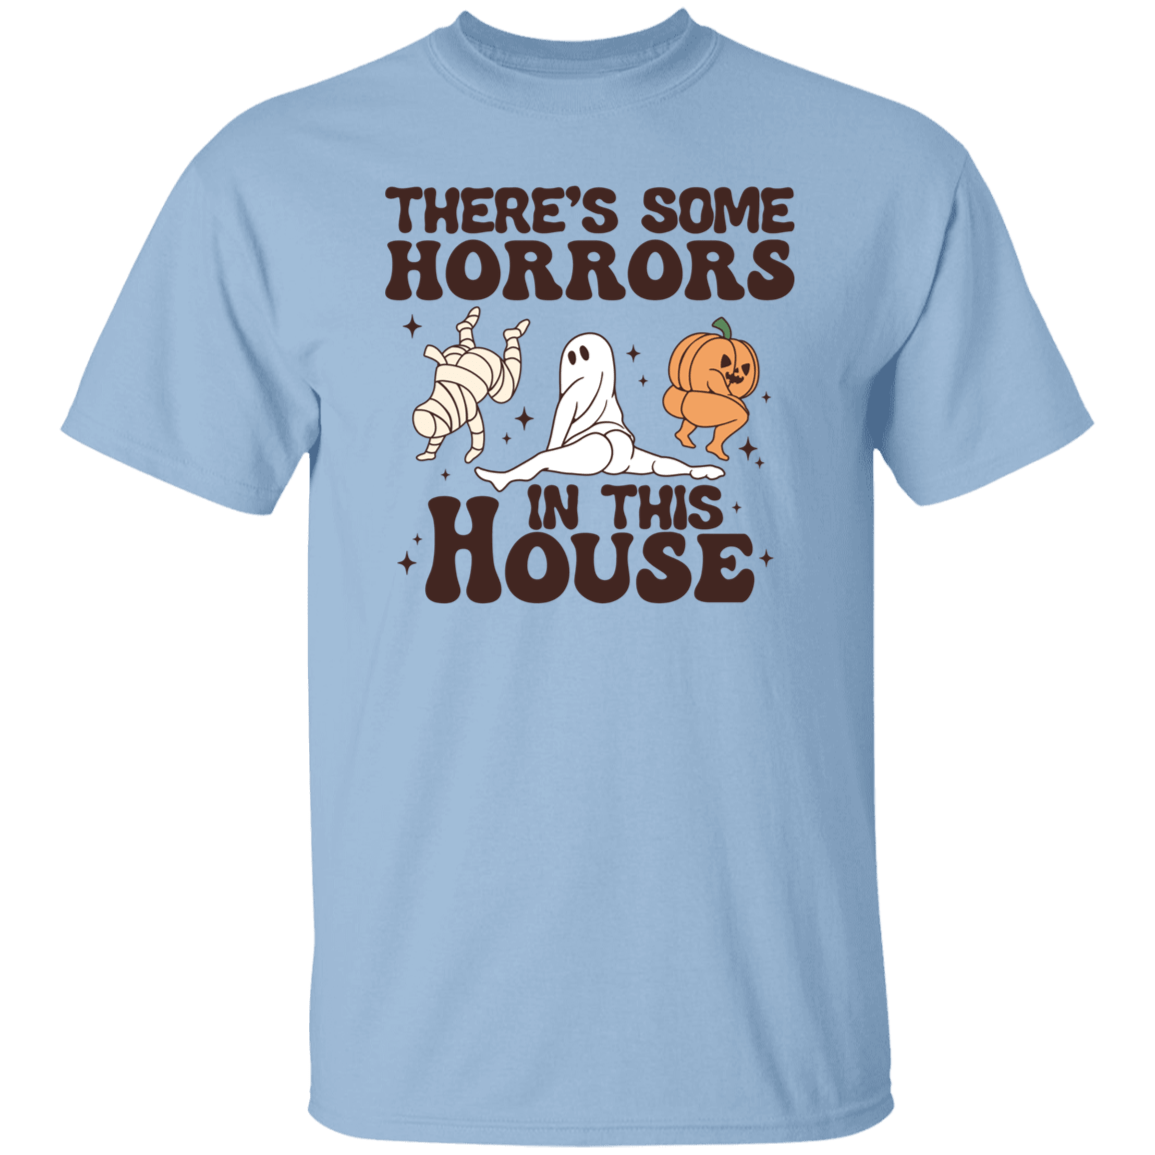 There's some Horror in the House T-Shirt